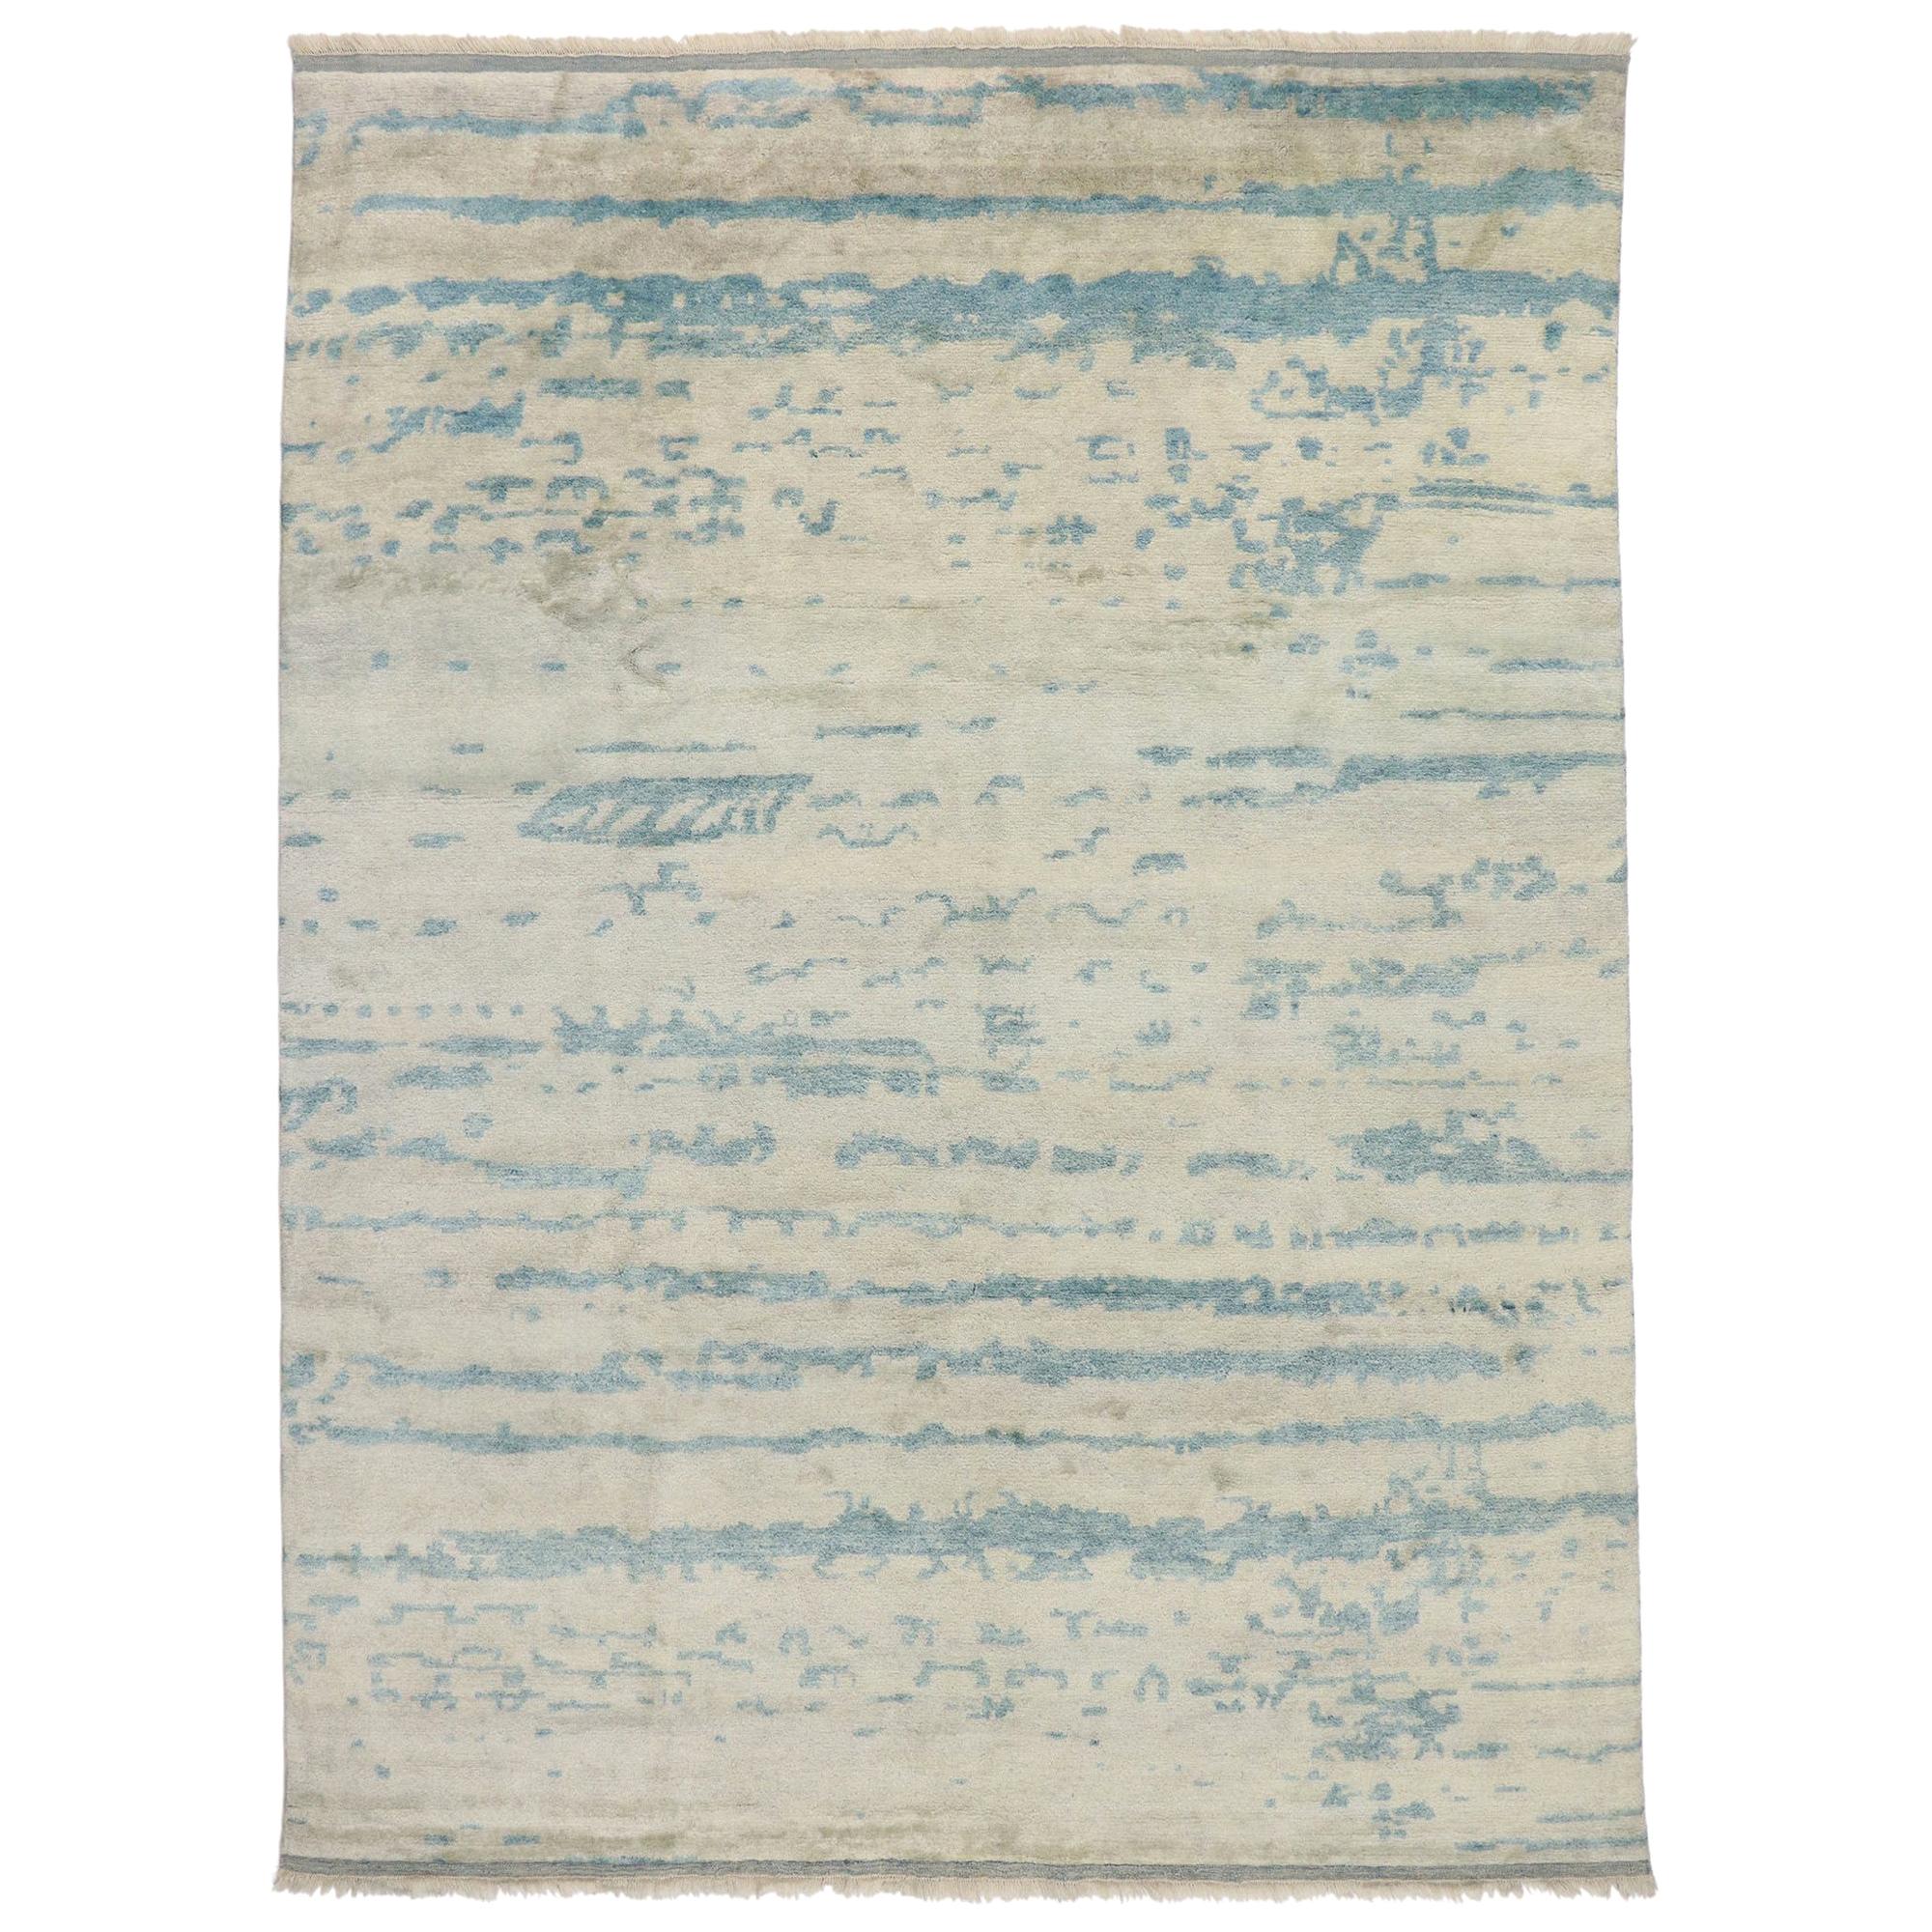 New Contemporary Moroccan Beach Style Rug with Transitional Coastal Design